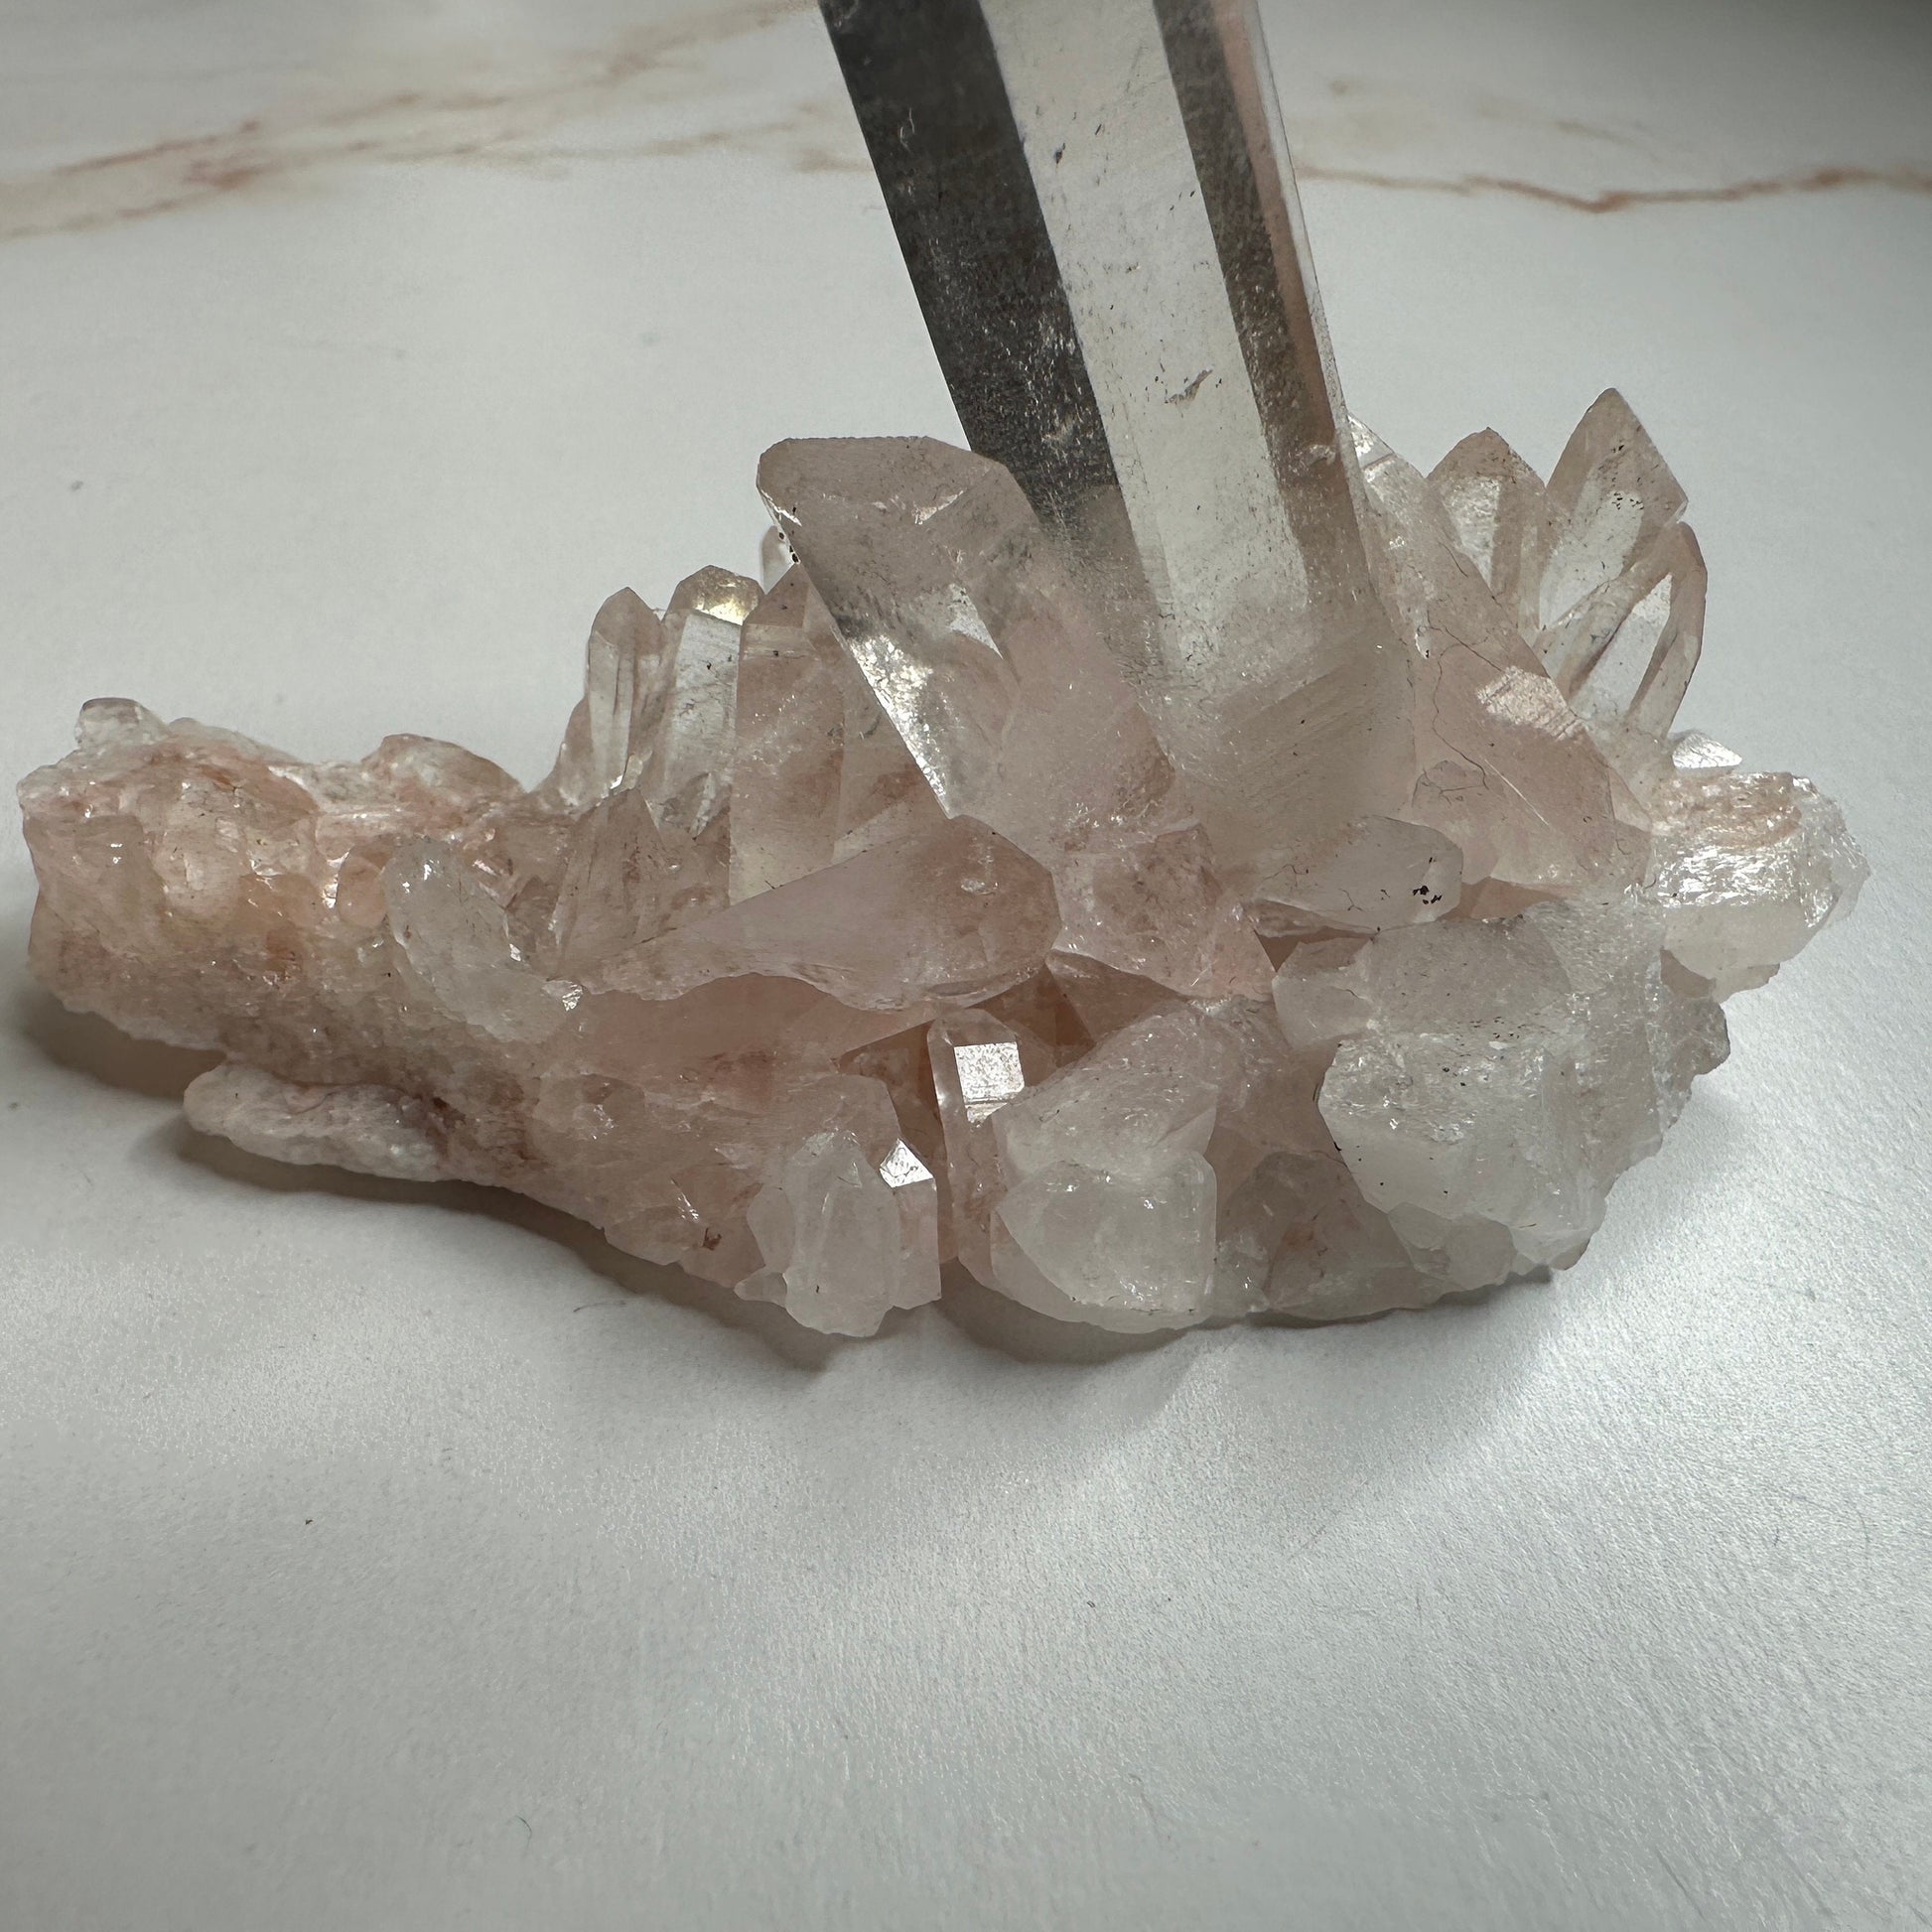 Pretty Pink Himalayan Samadhi Quartz High-Quality Genuine Specimen Crystal Cluster from India | Tucson Gem Show Exclusive